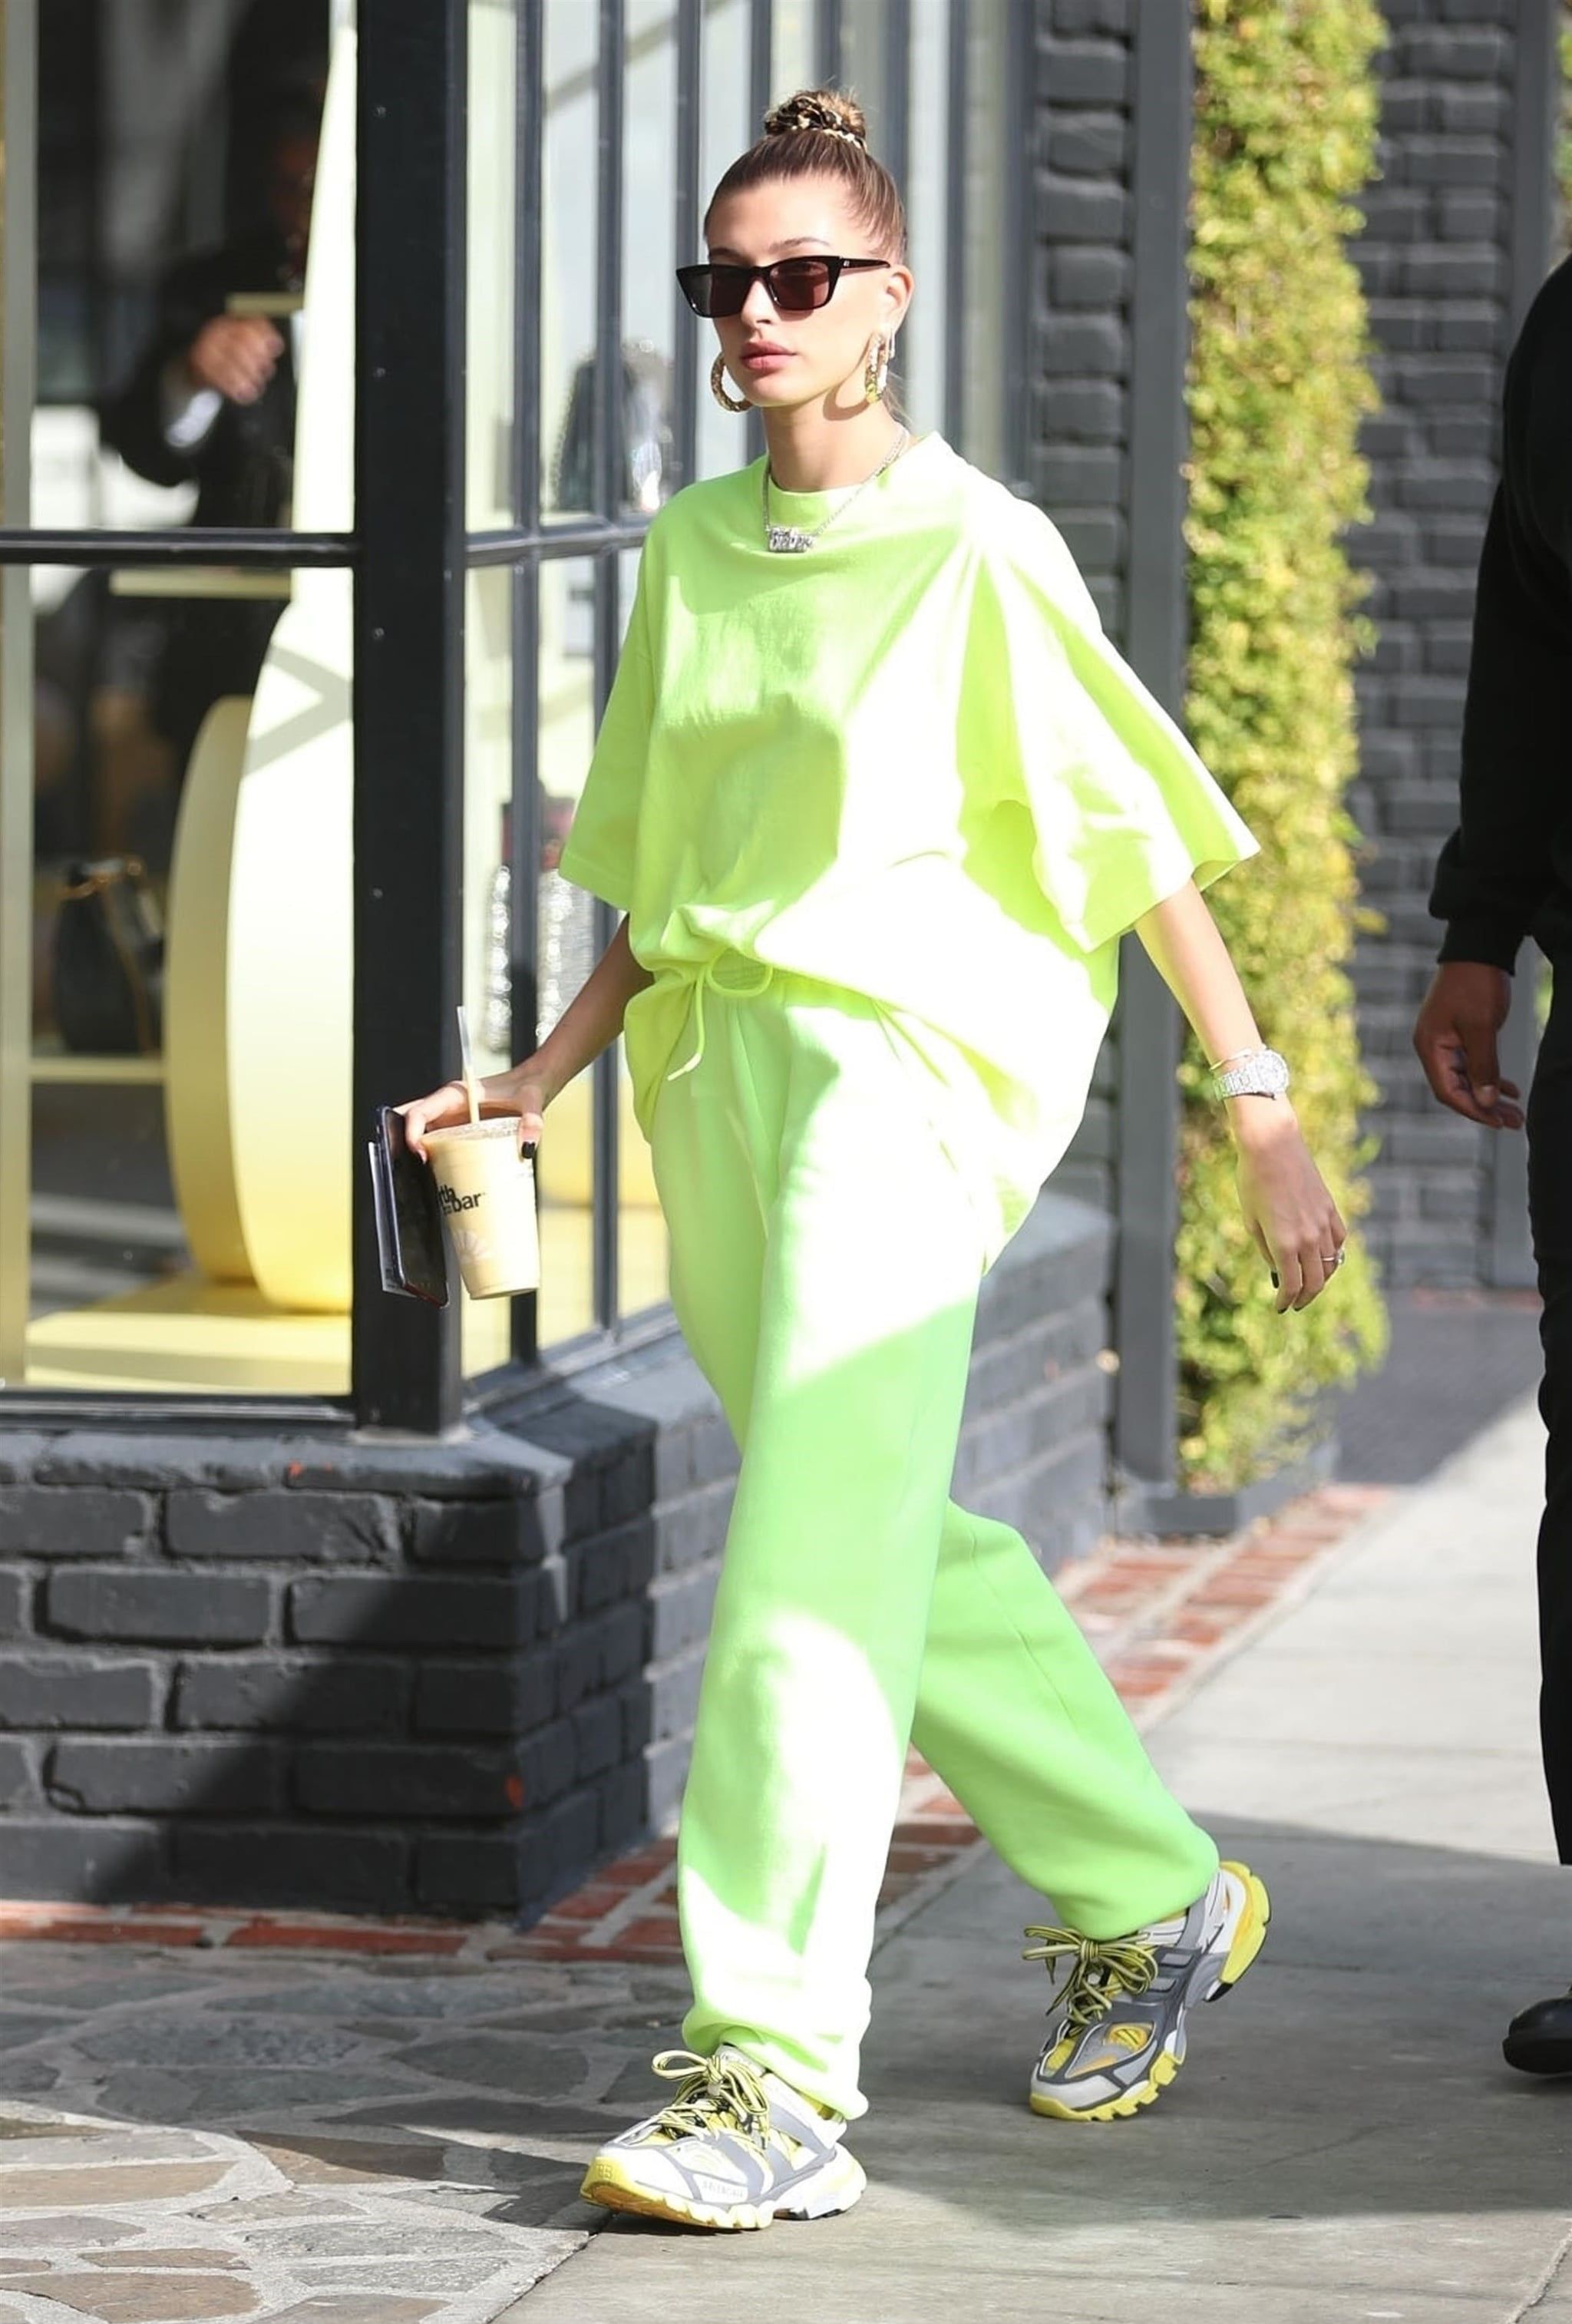 Hollywood Celebrity Sexy Style Wears a whimsical Lime Green